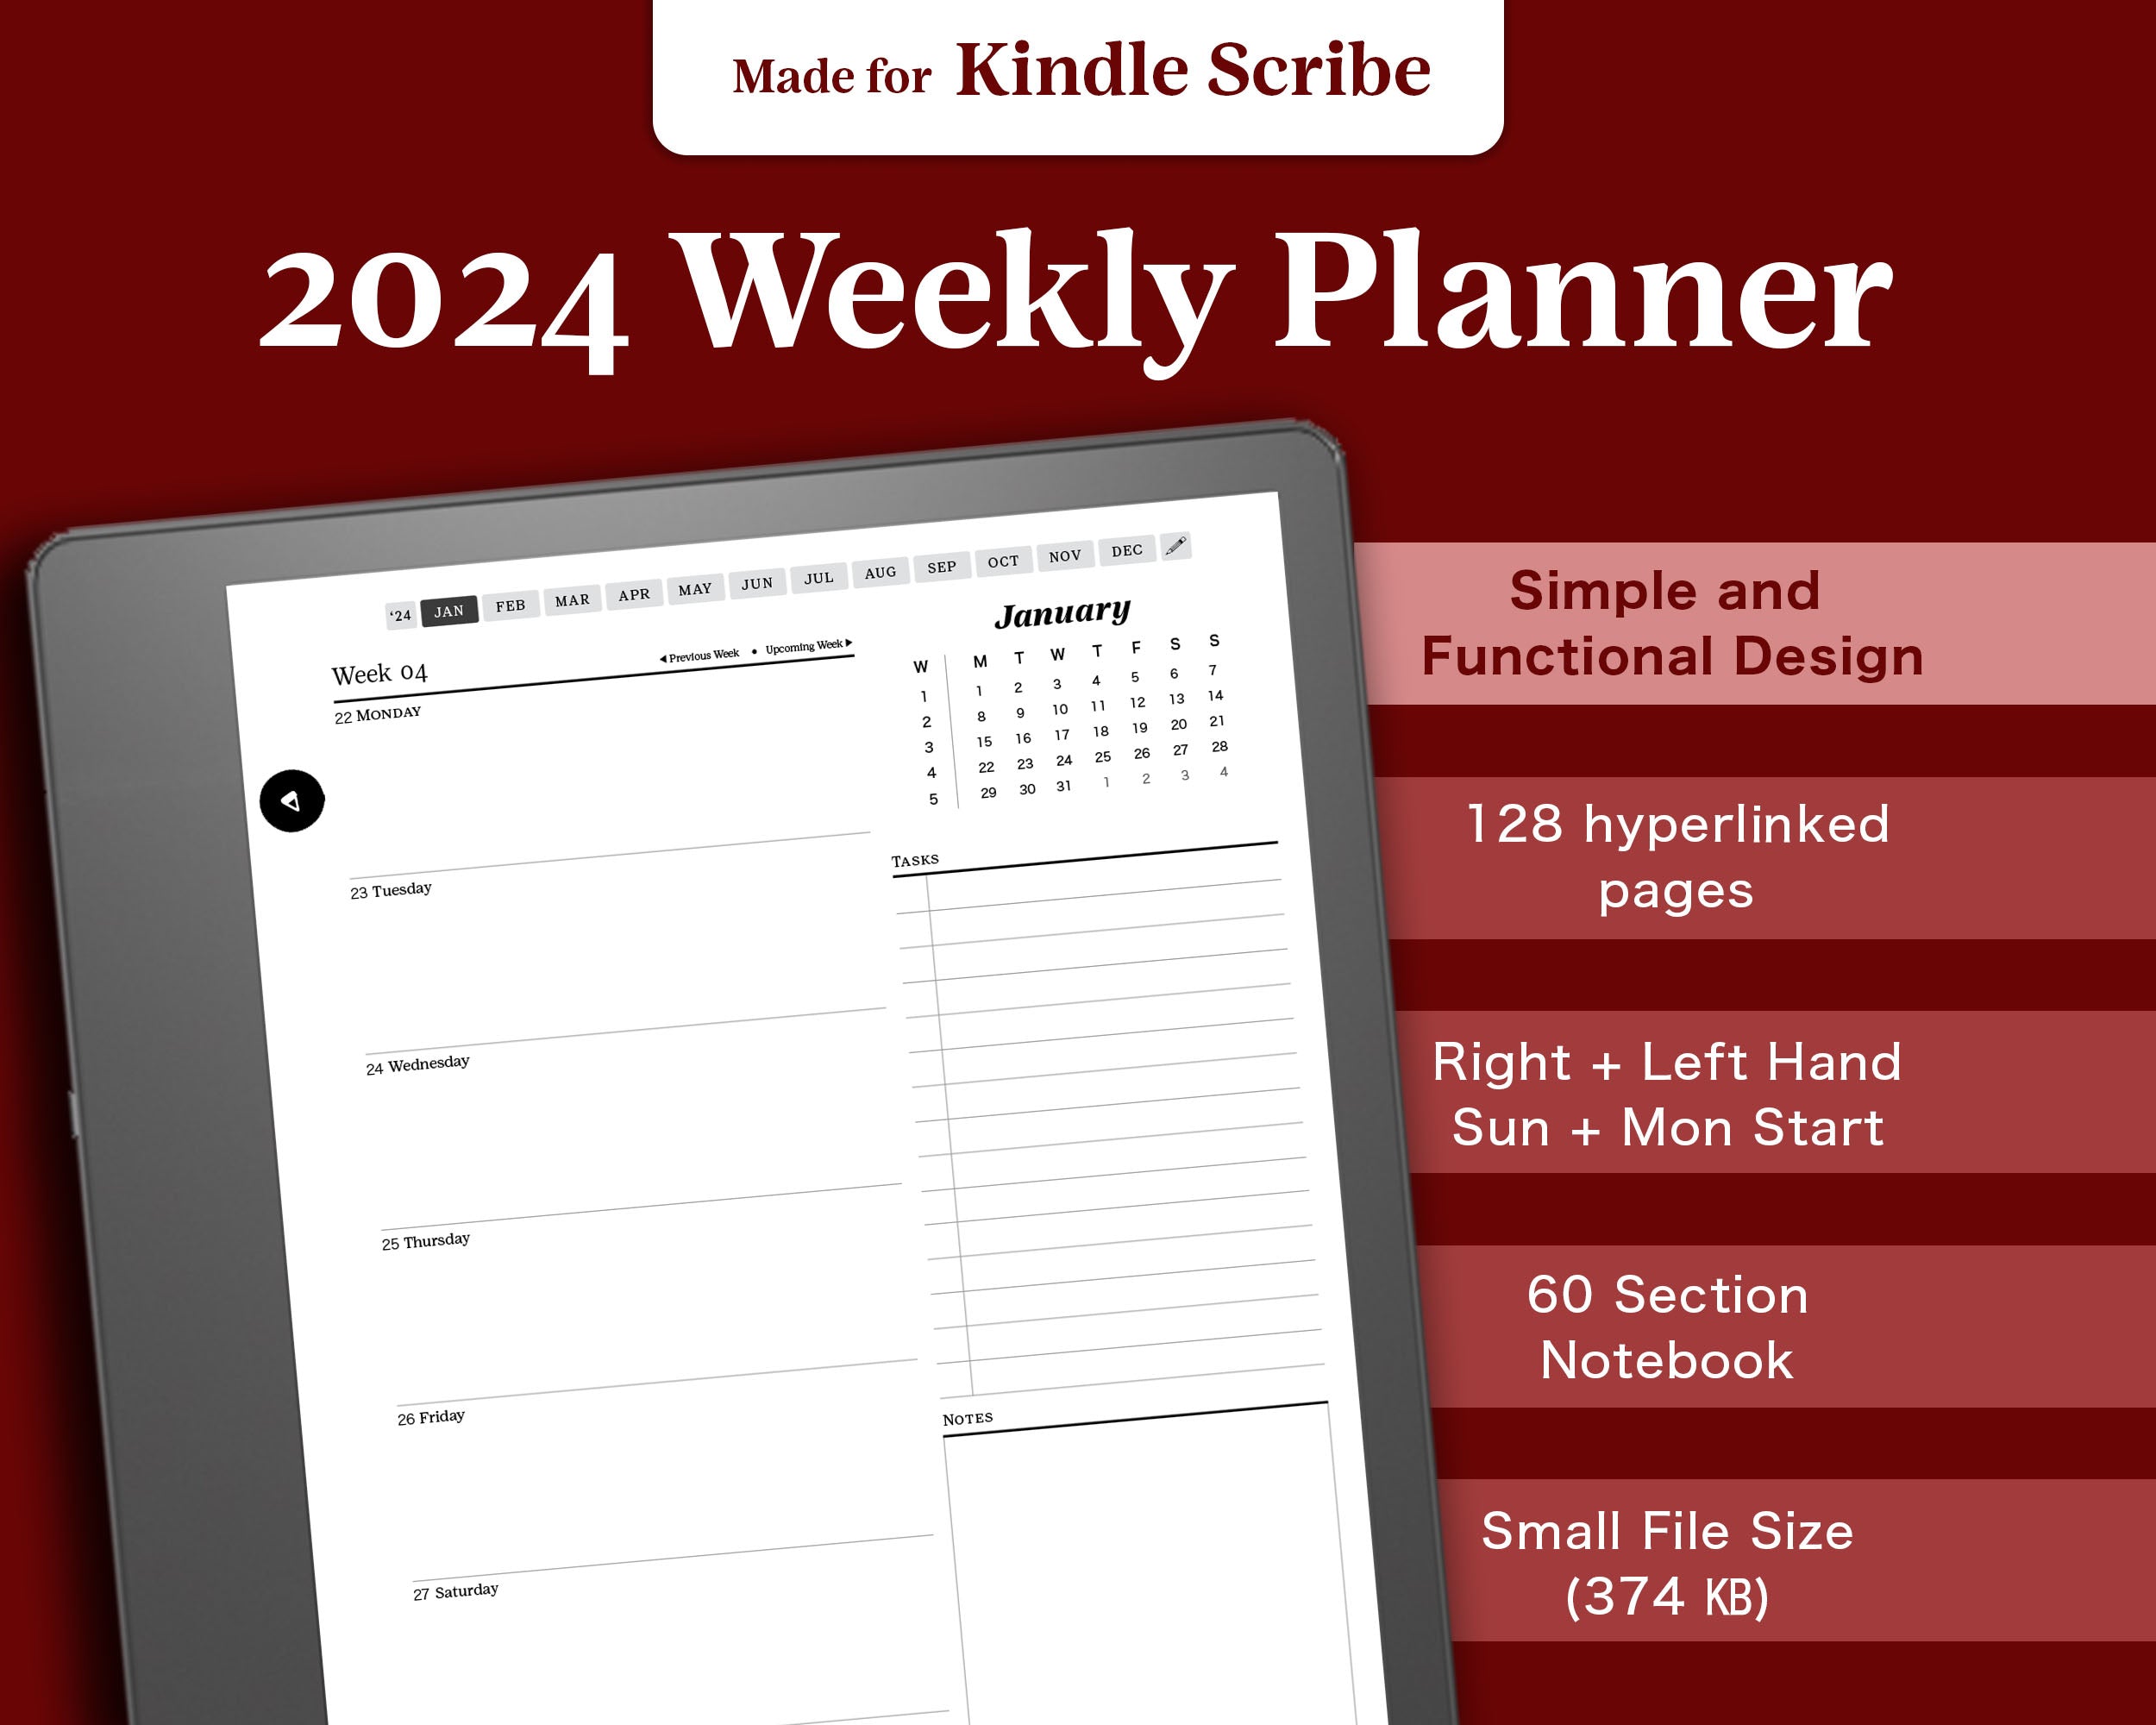 Kindle Scribe Template, Calendar 2023, 2024, 2025, All-in-One